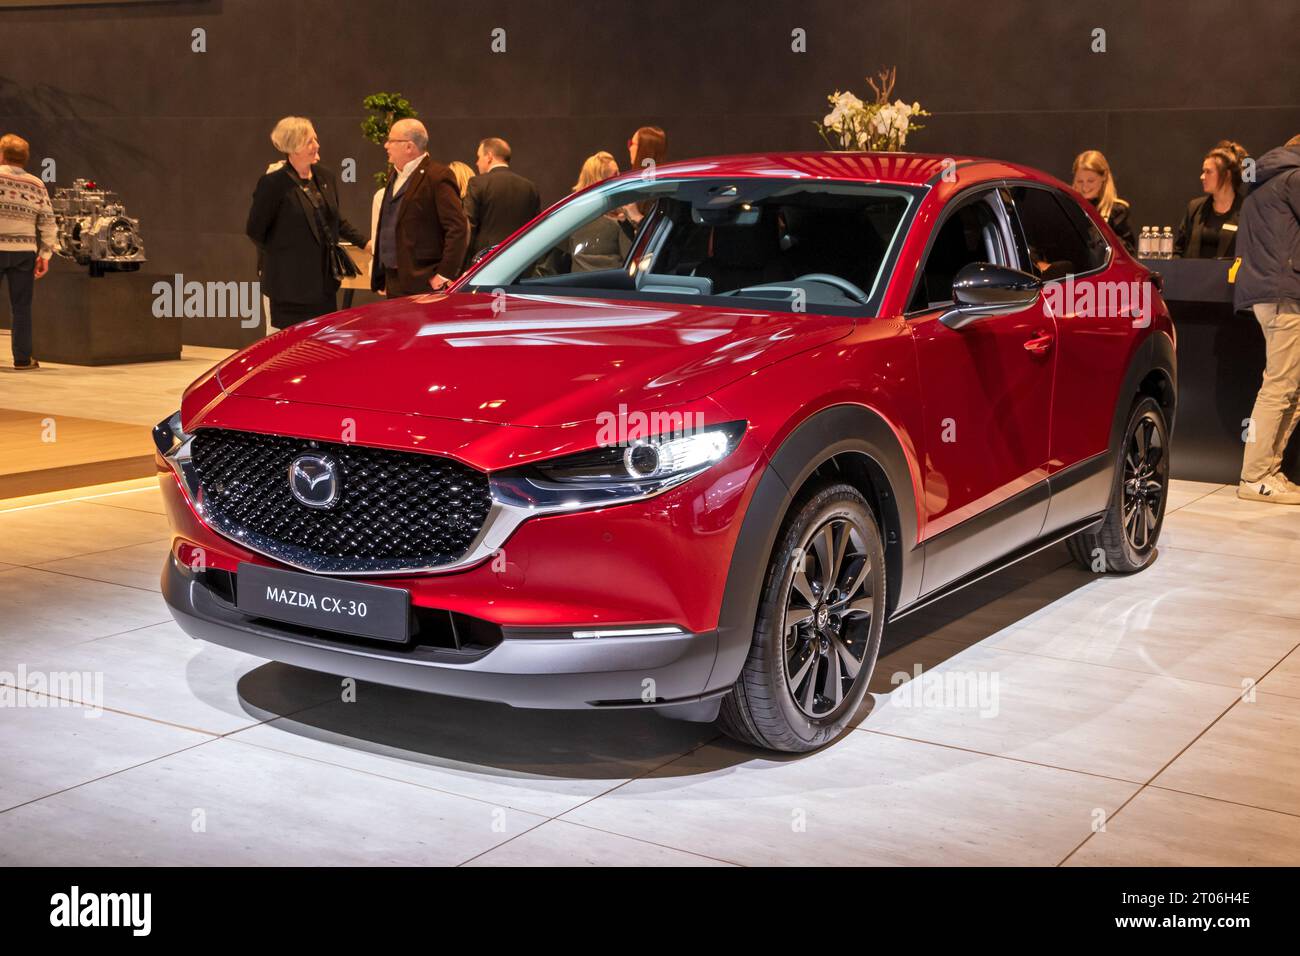 Mazda CX-30 hybrid compact SUV car at the Brussels Autosalon European Motor Show. Brussels, Belgium - January 13, 2023. Stock Photo